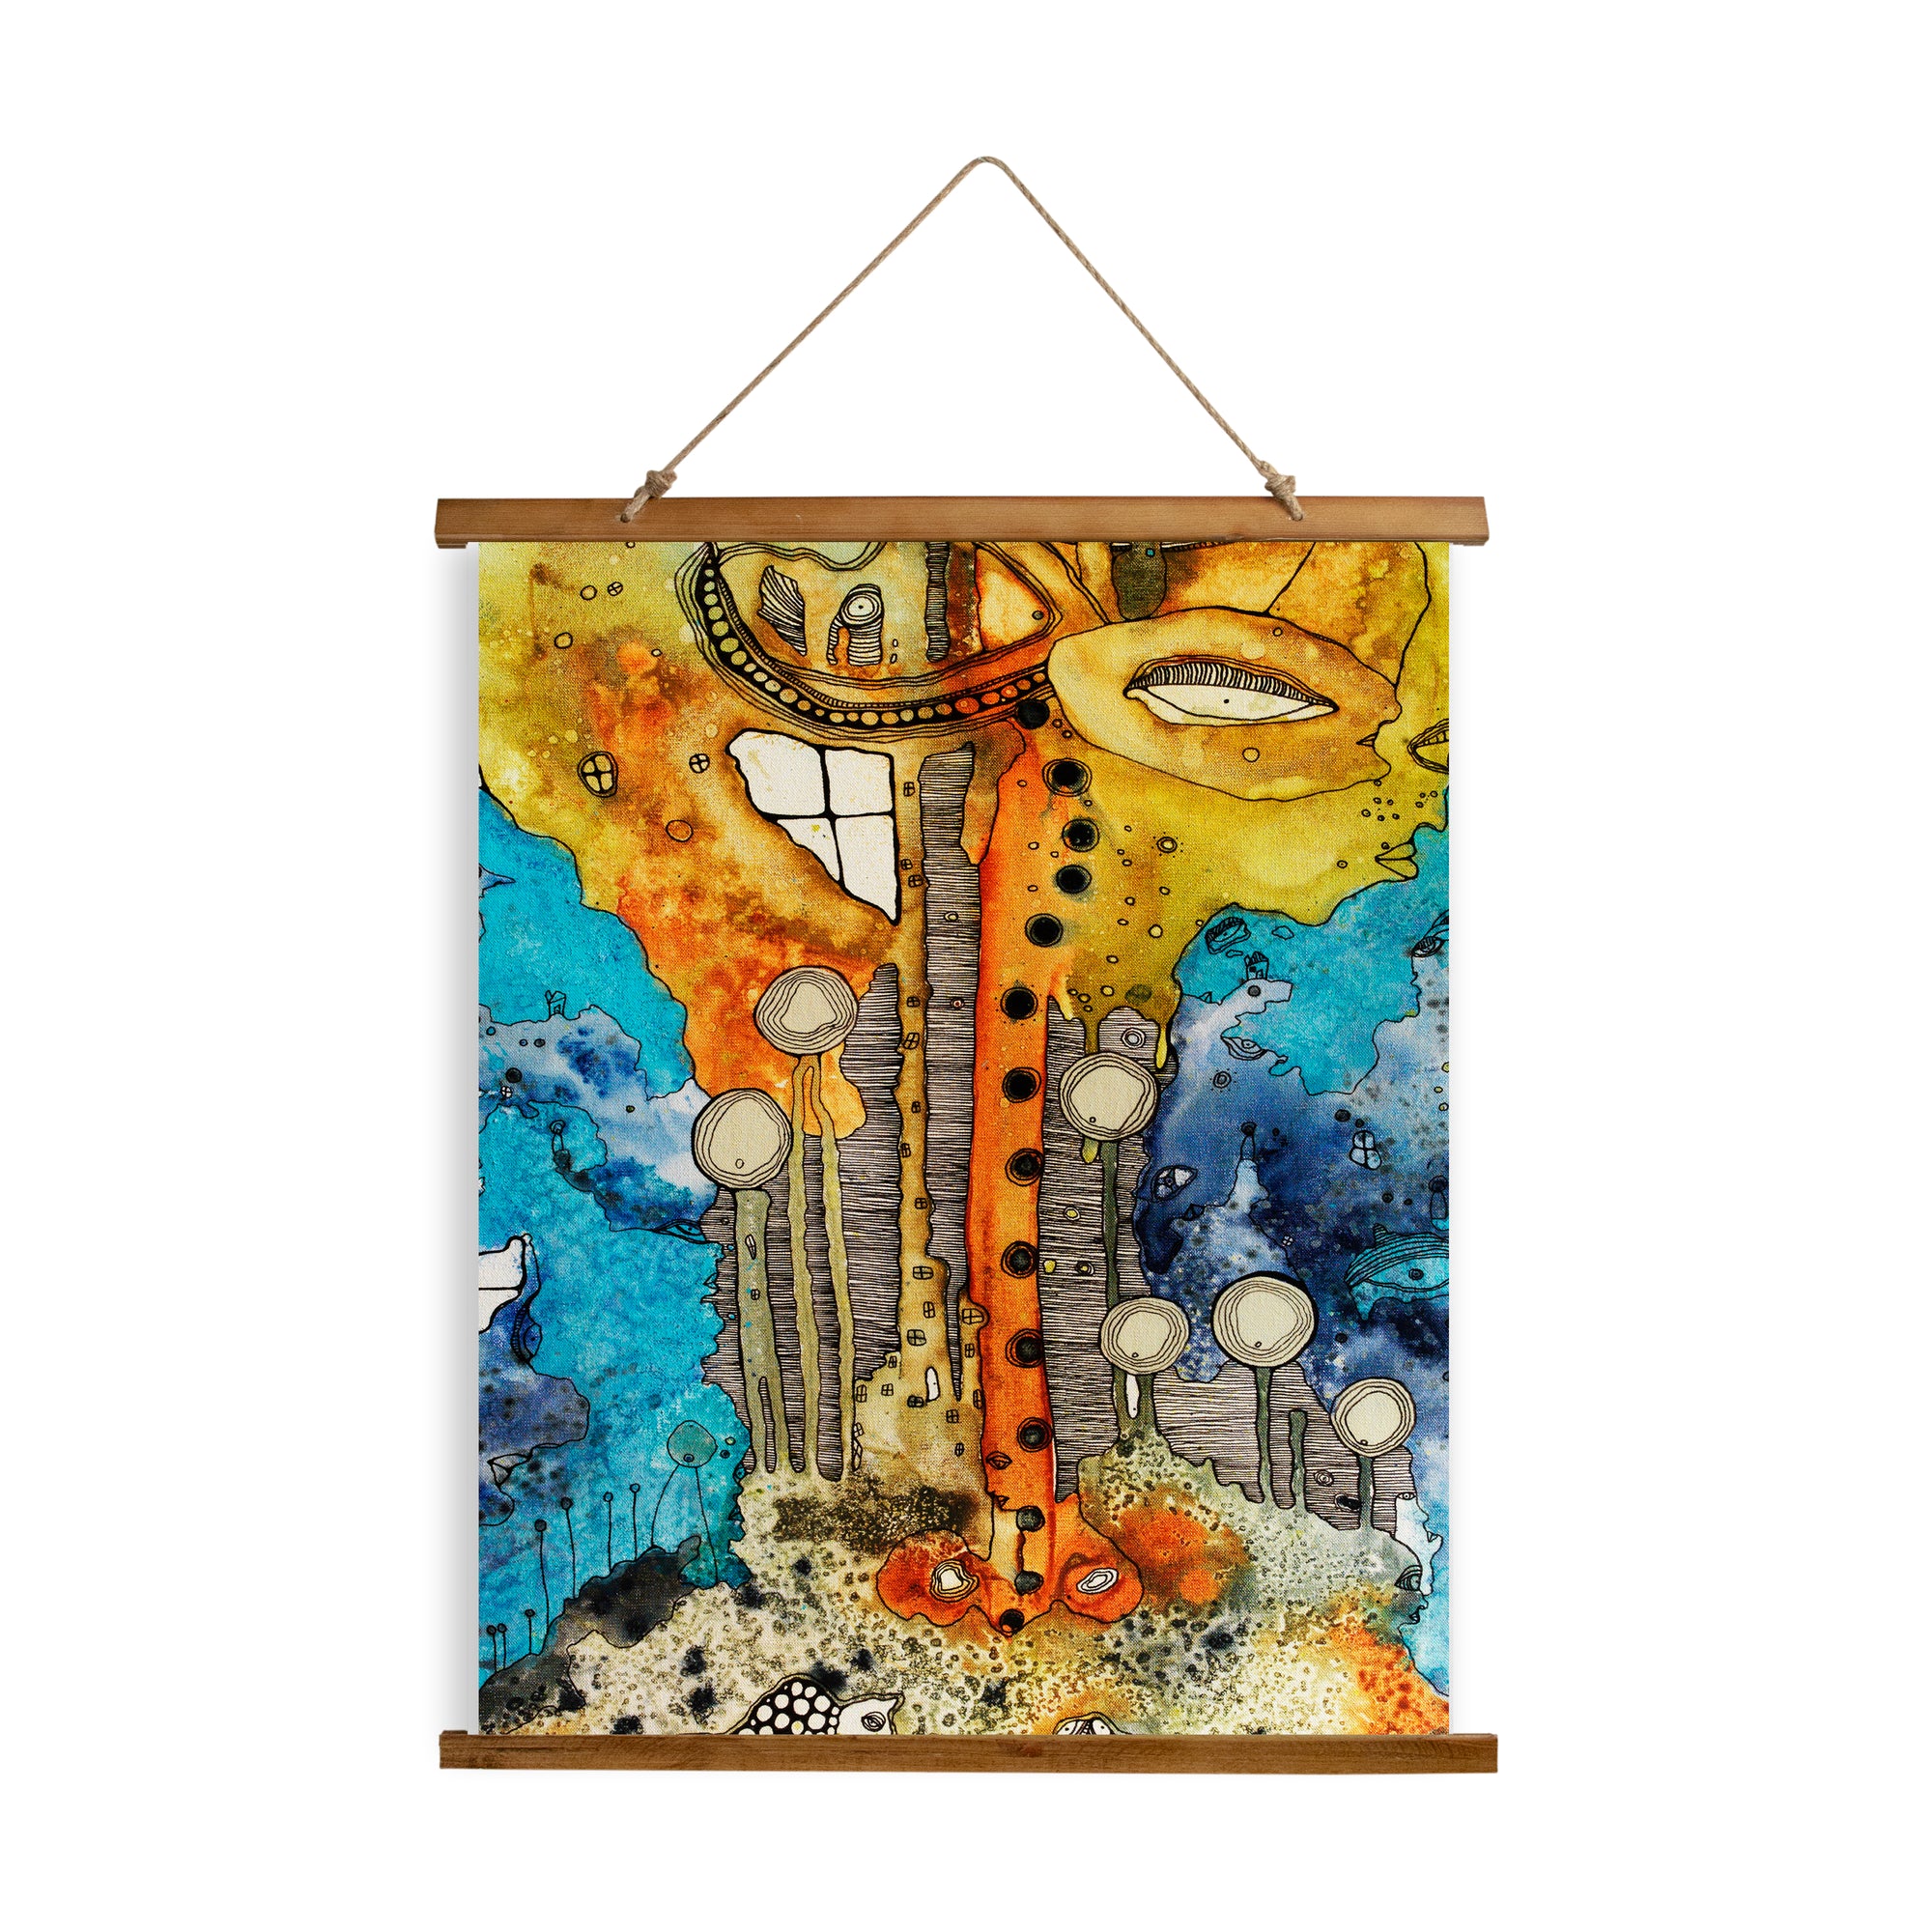 Whimsical Wood Slat Tapestry "Growing on me"